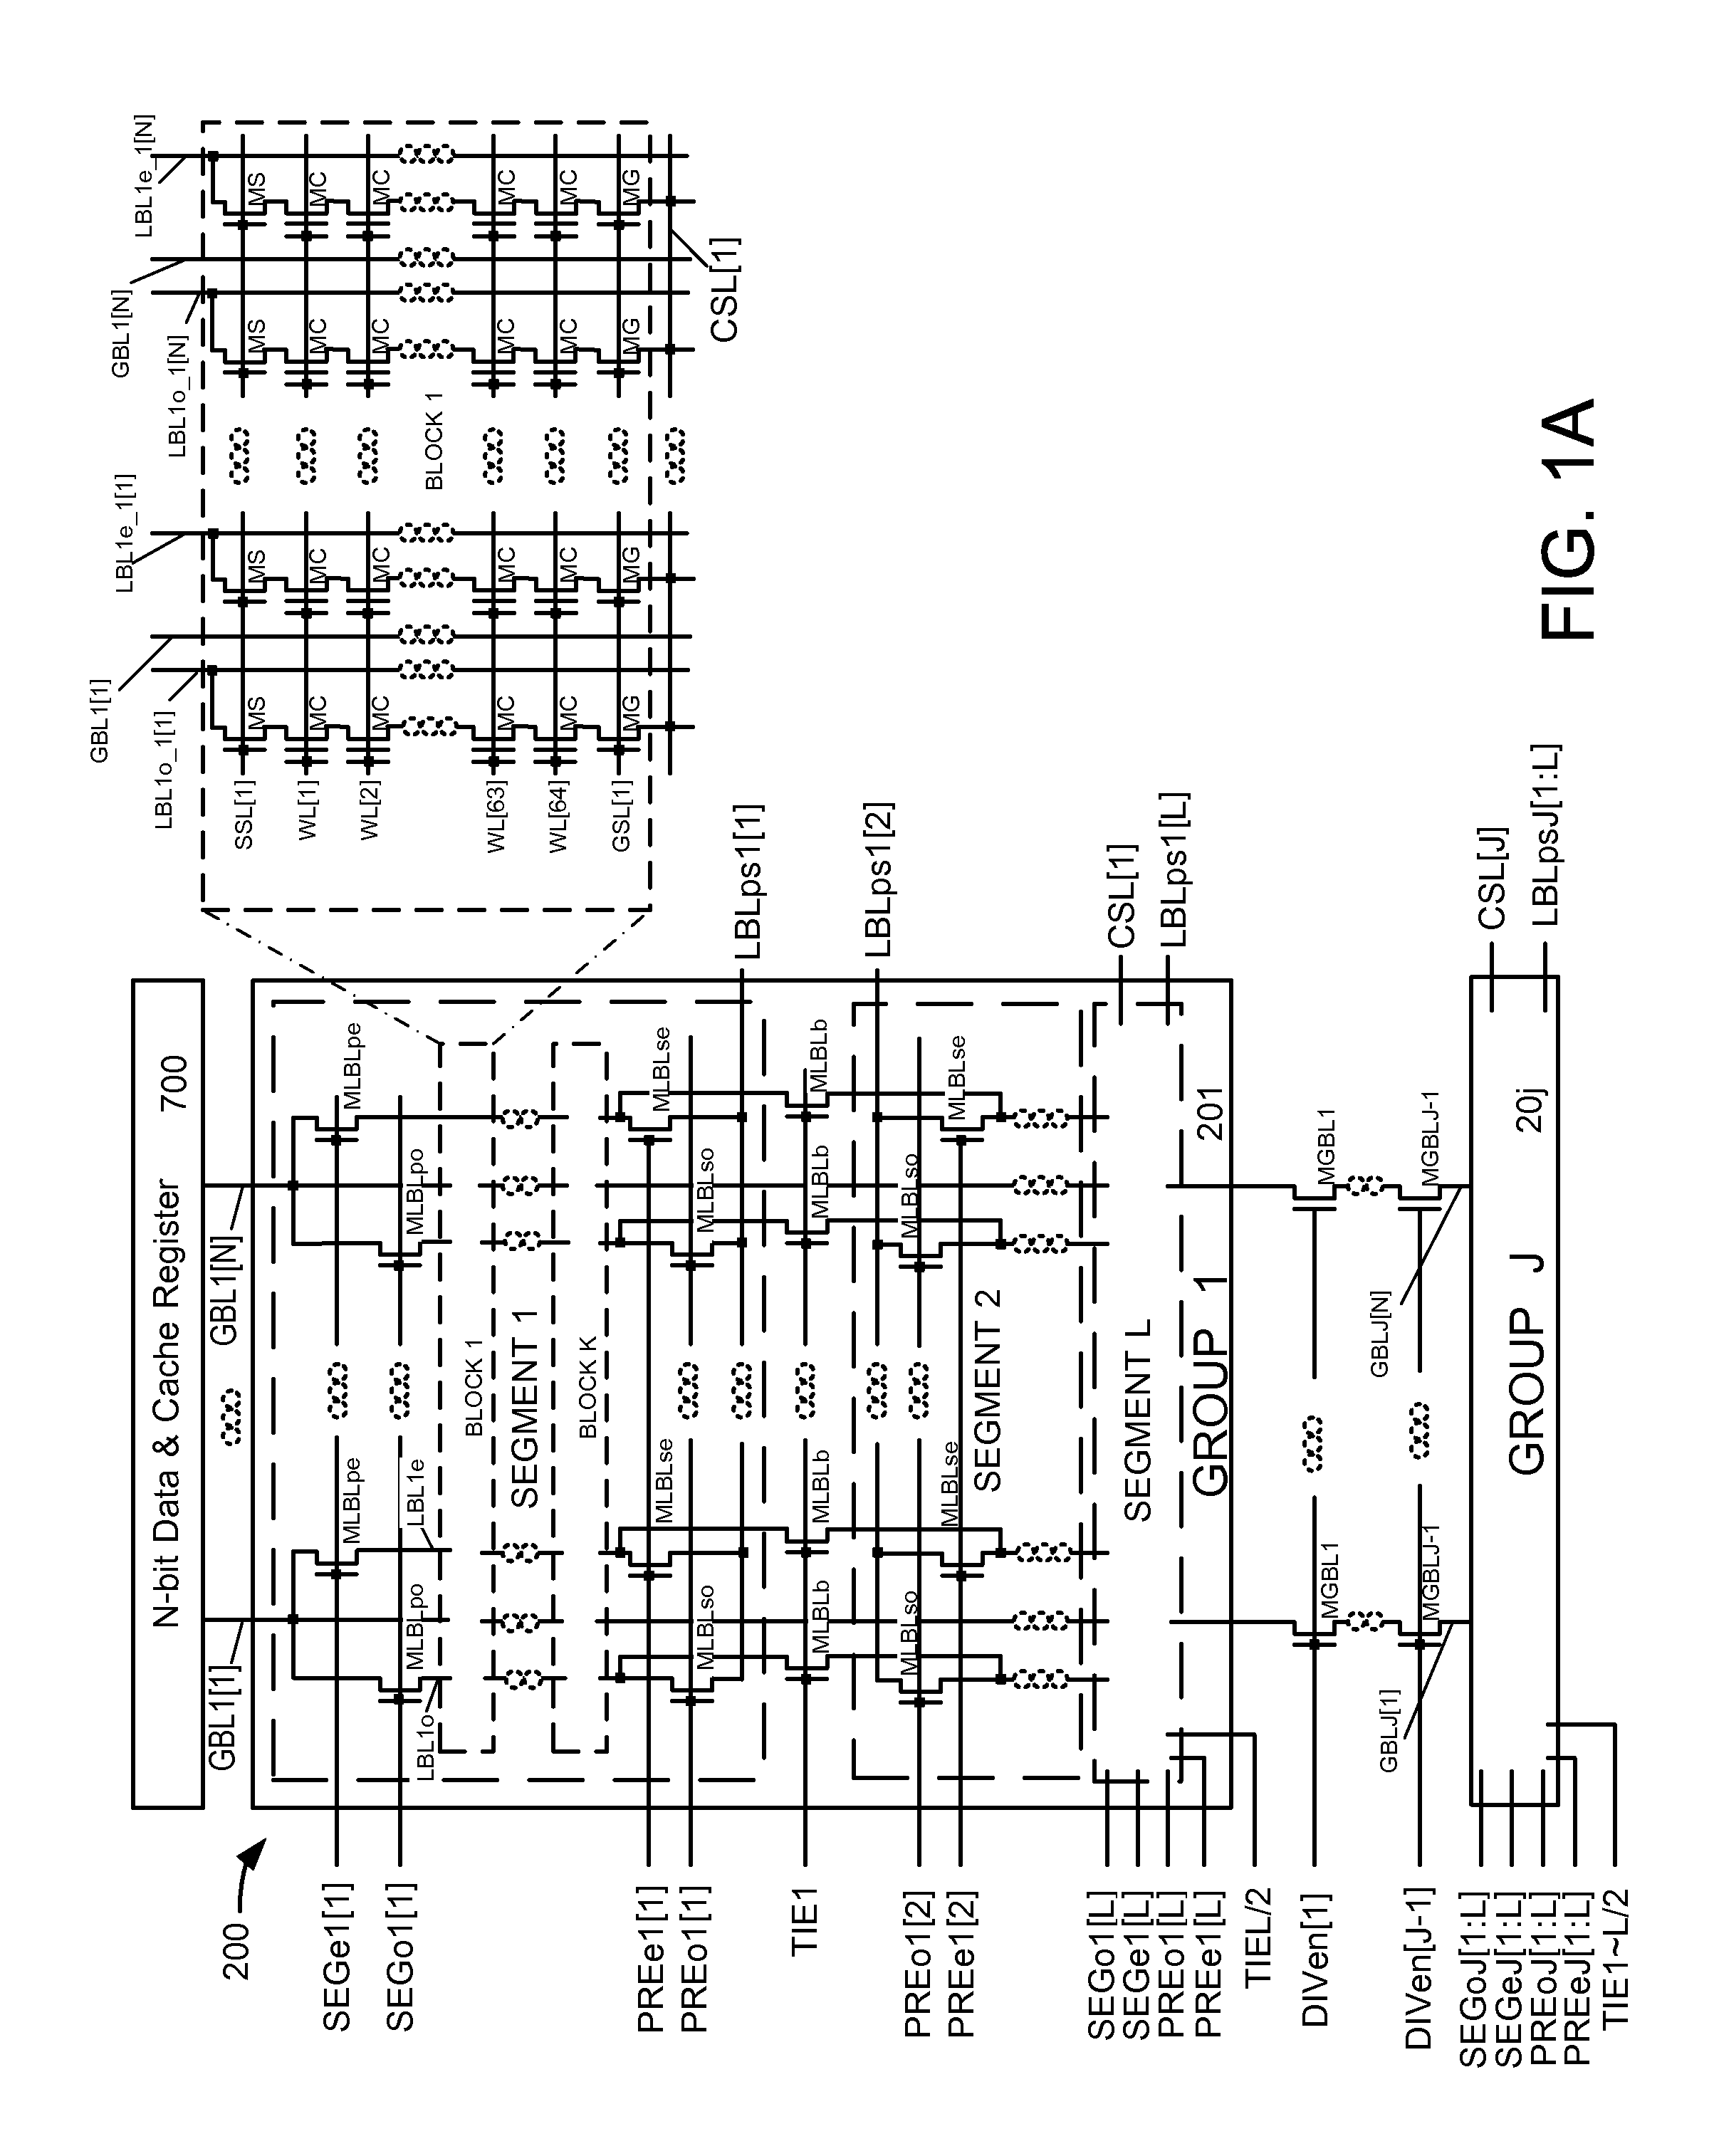 HYBRID NAND WITH ALL-BL m-PAGE OPERATION SCHEME